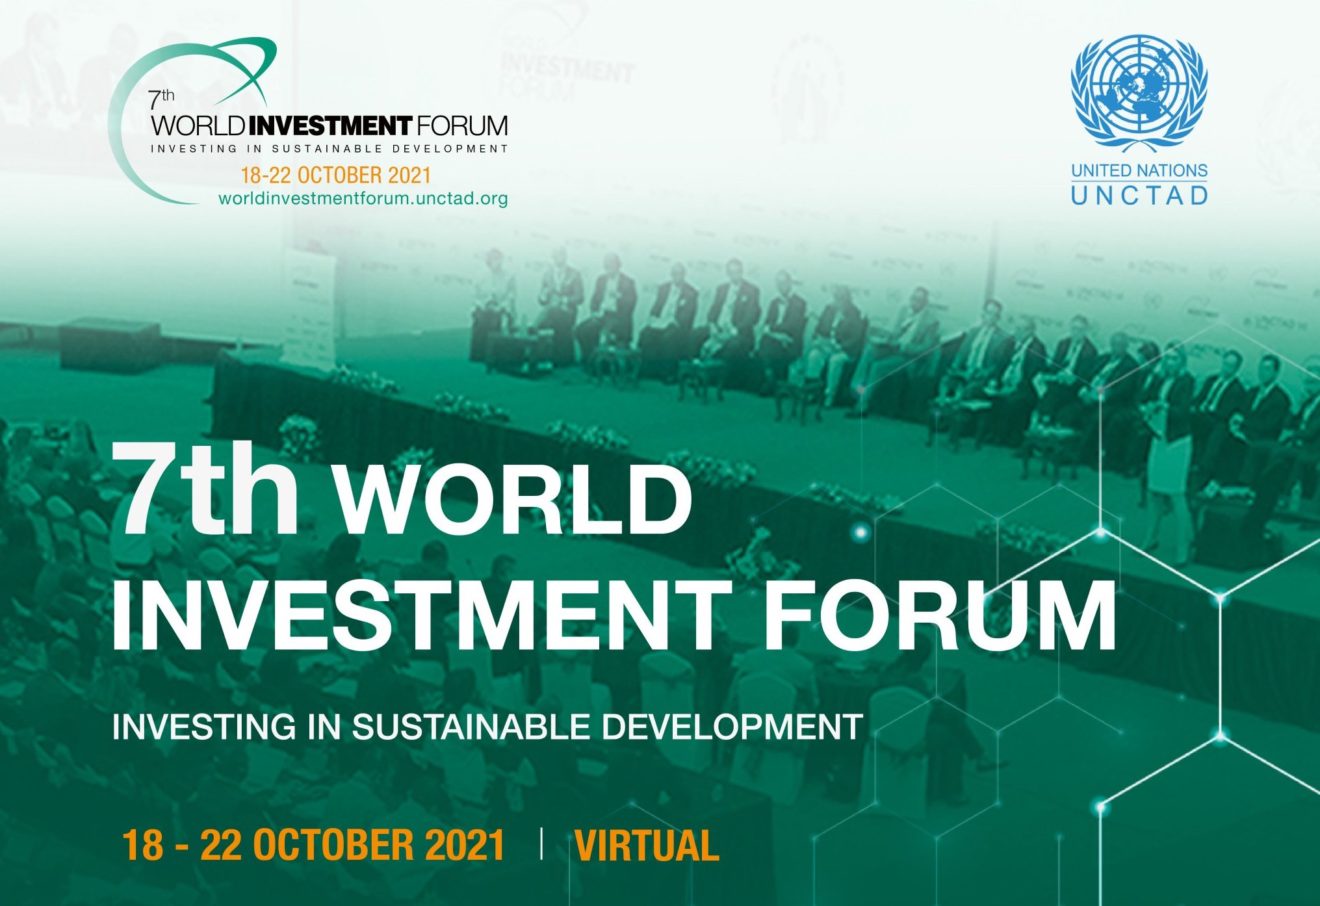 Kazakhstans Investment Activities Discussed At Unctad World Investment Forum The Astana Times 